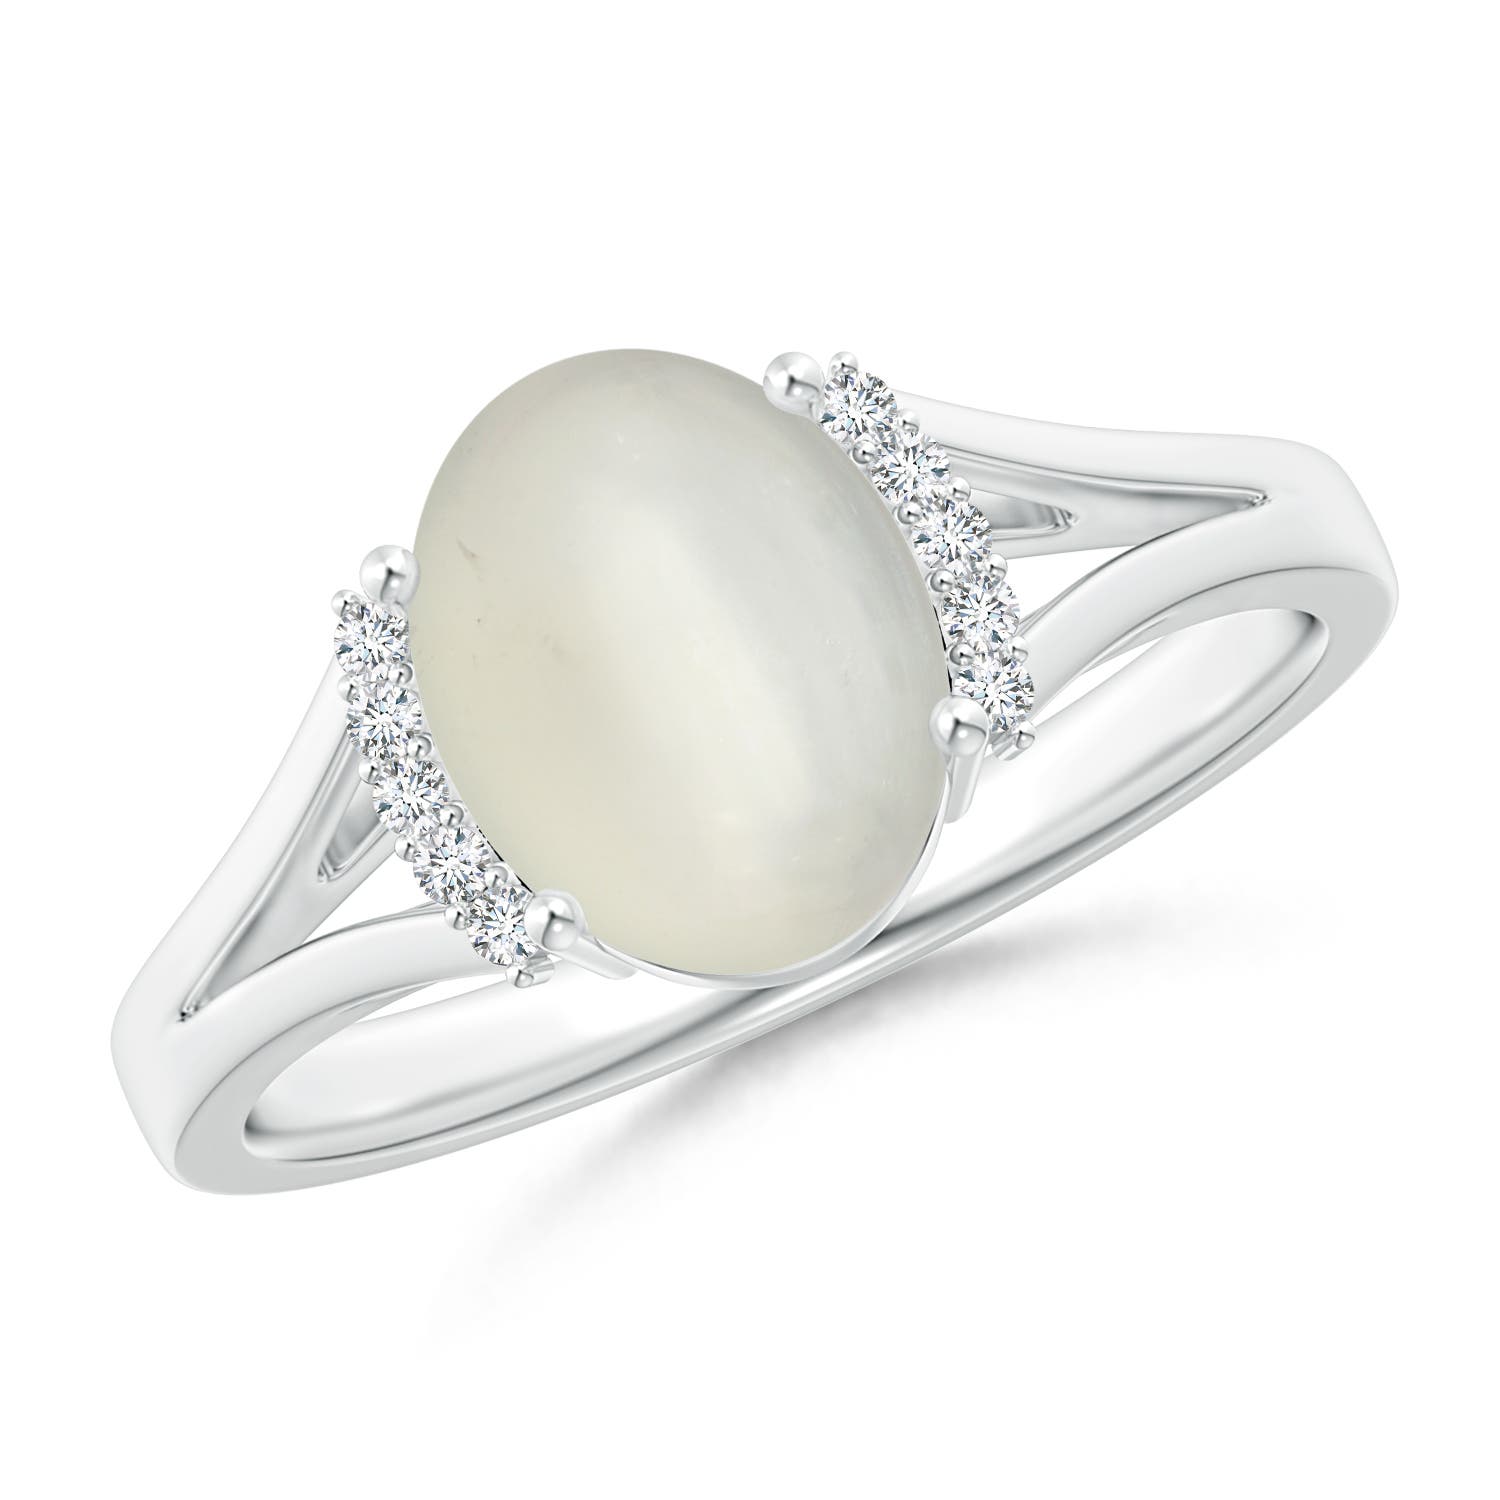 AAA - Moonstone / 1.77 CT / 14 KT White Gold